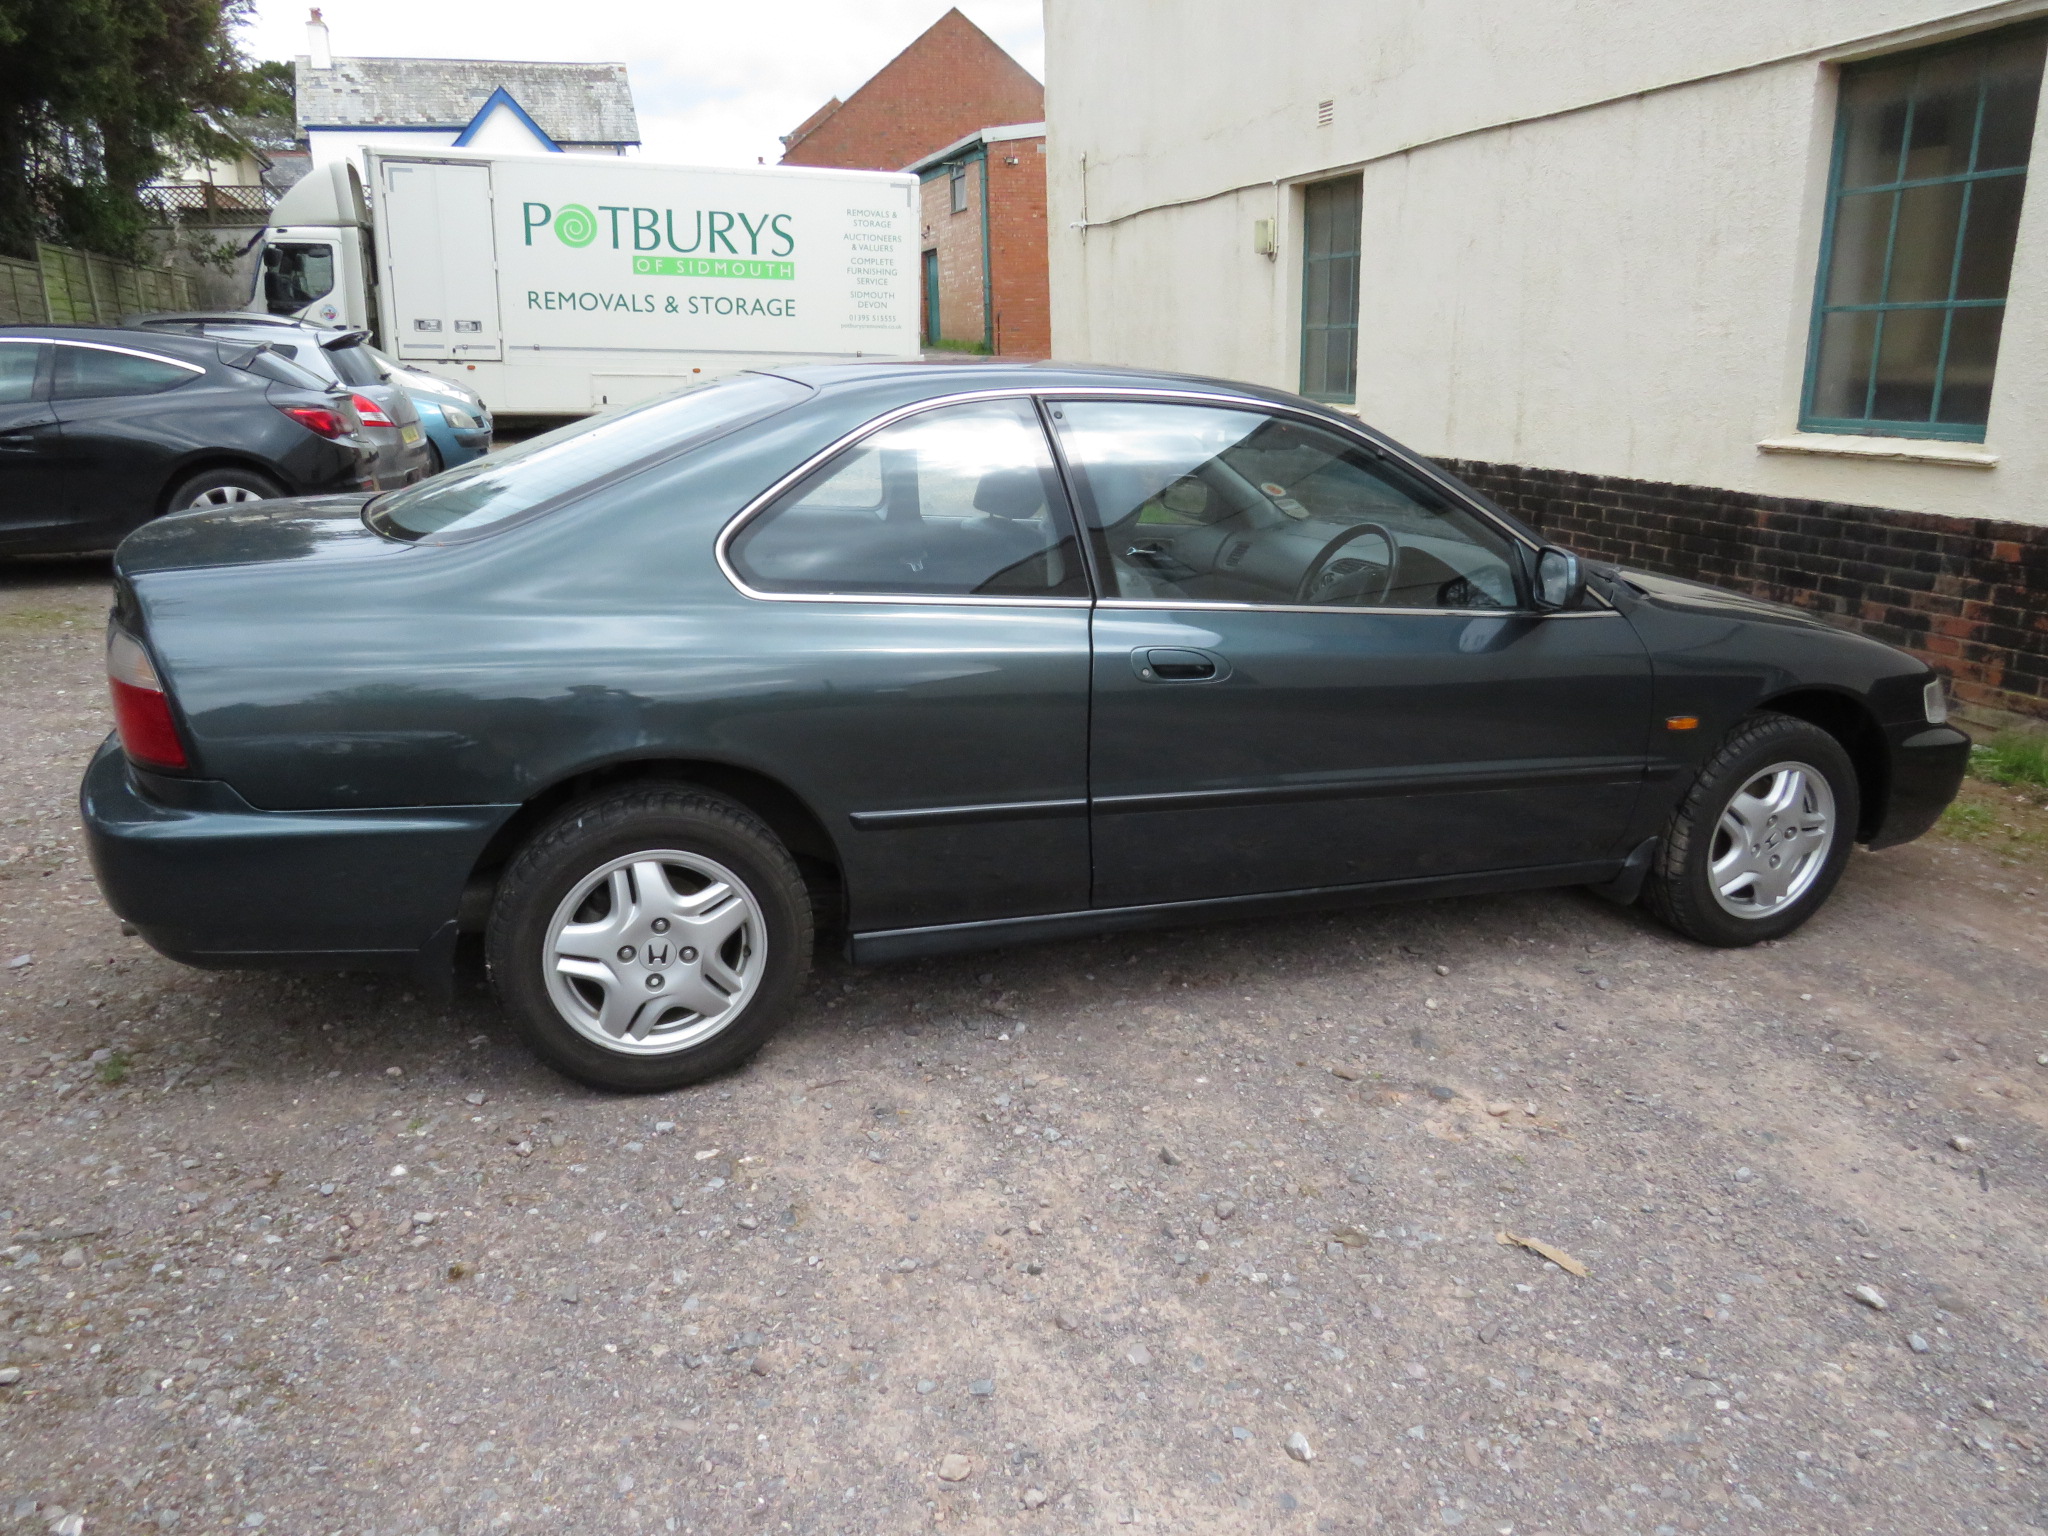 HONDA ACCORD ES COUPE AUTO, R574 ULW, 35,942 MILES, DATE OF FIRST REGISTRATION 19 08 1997, 2156CC, - Image 14 of 20